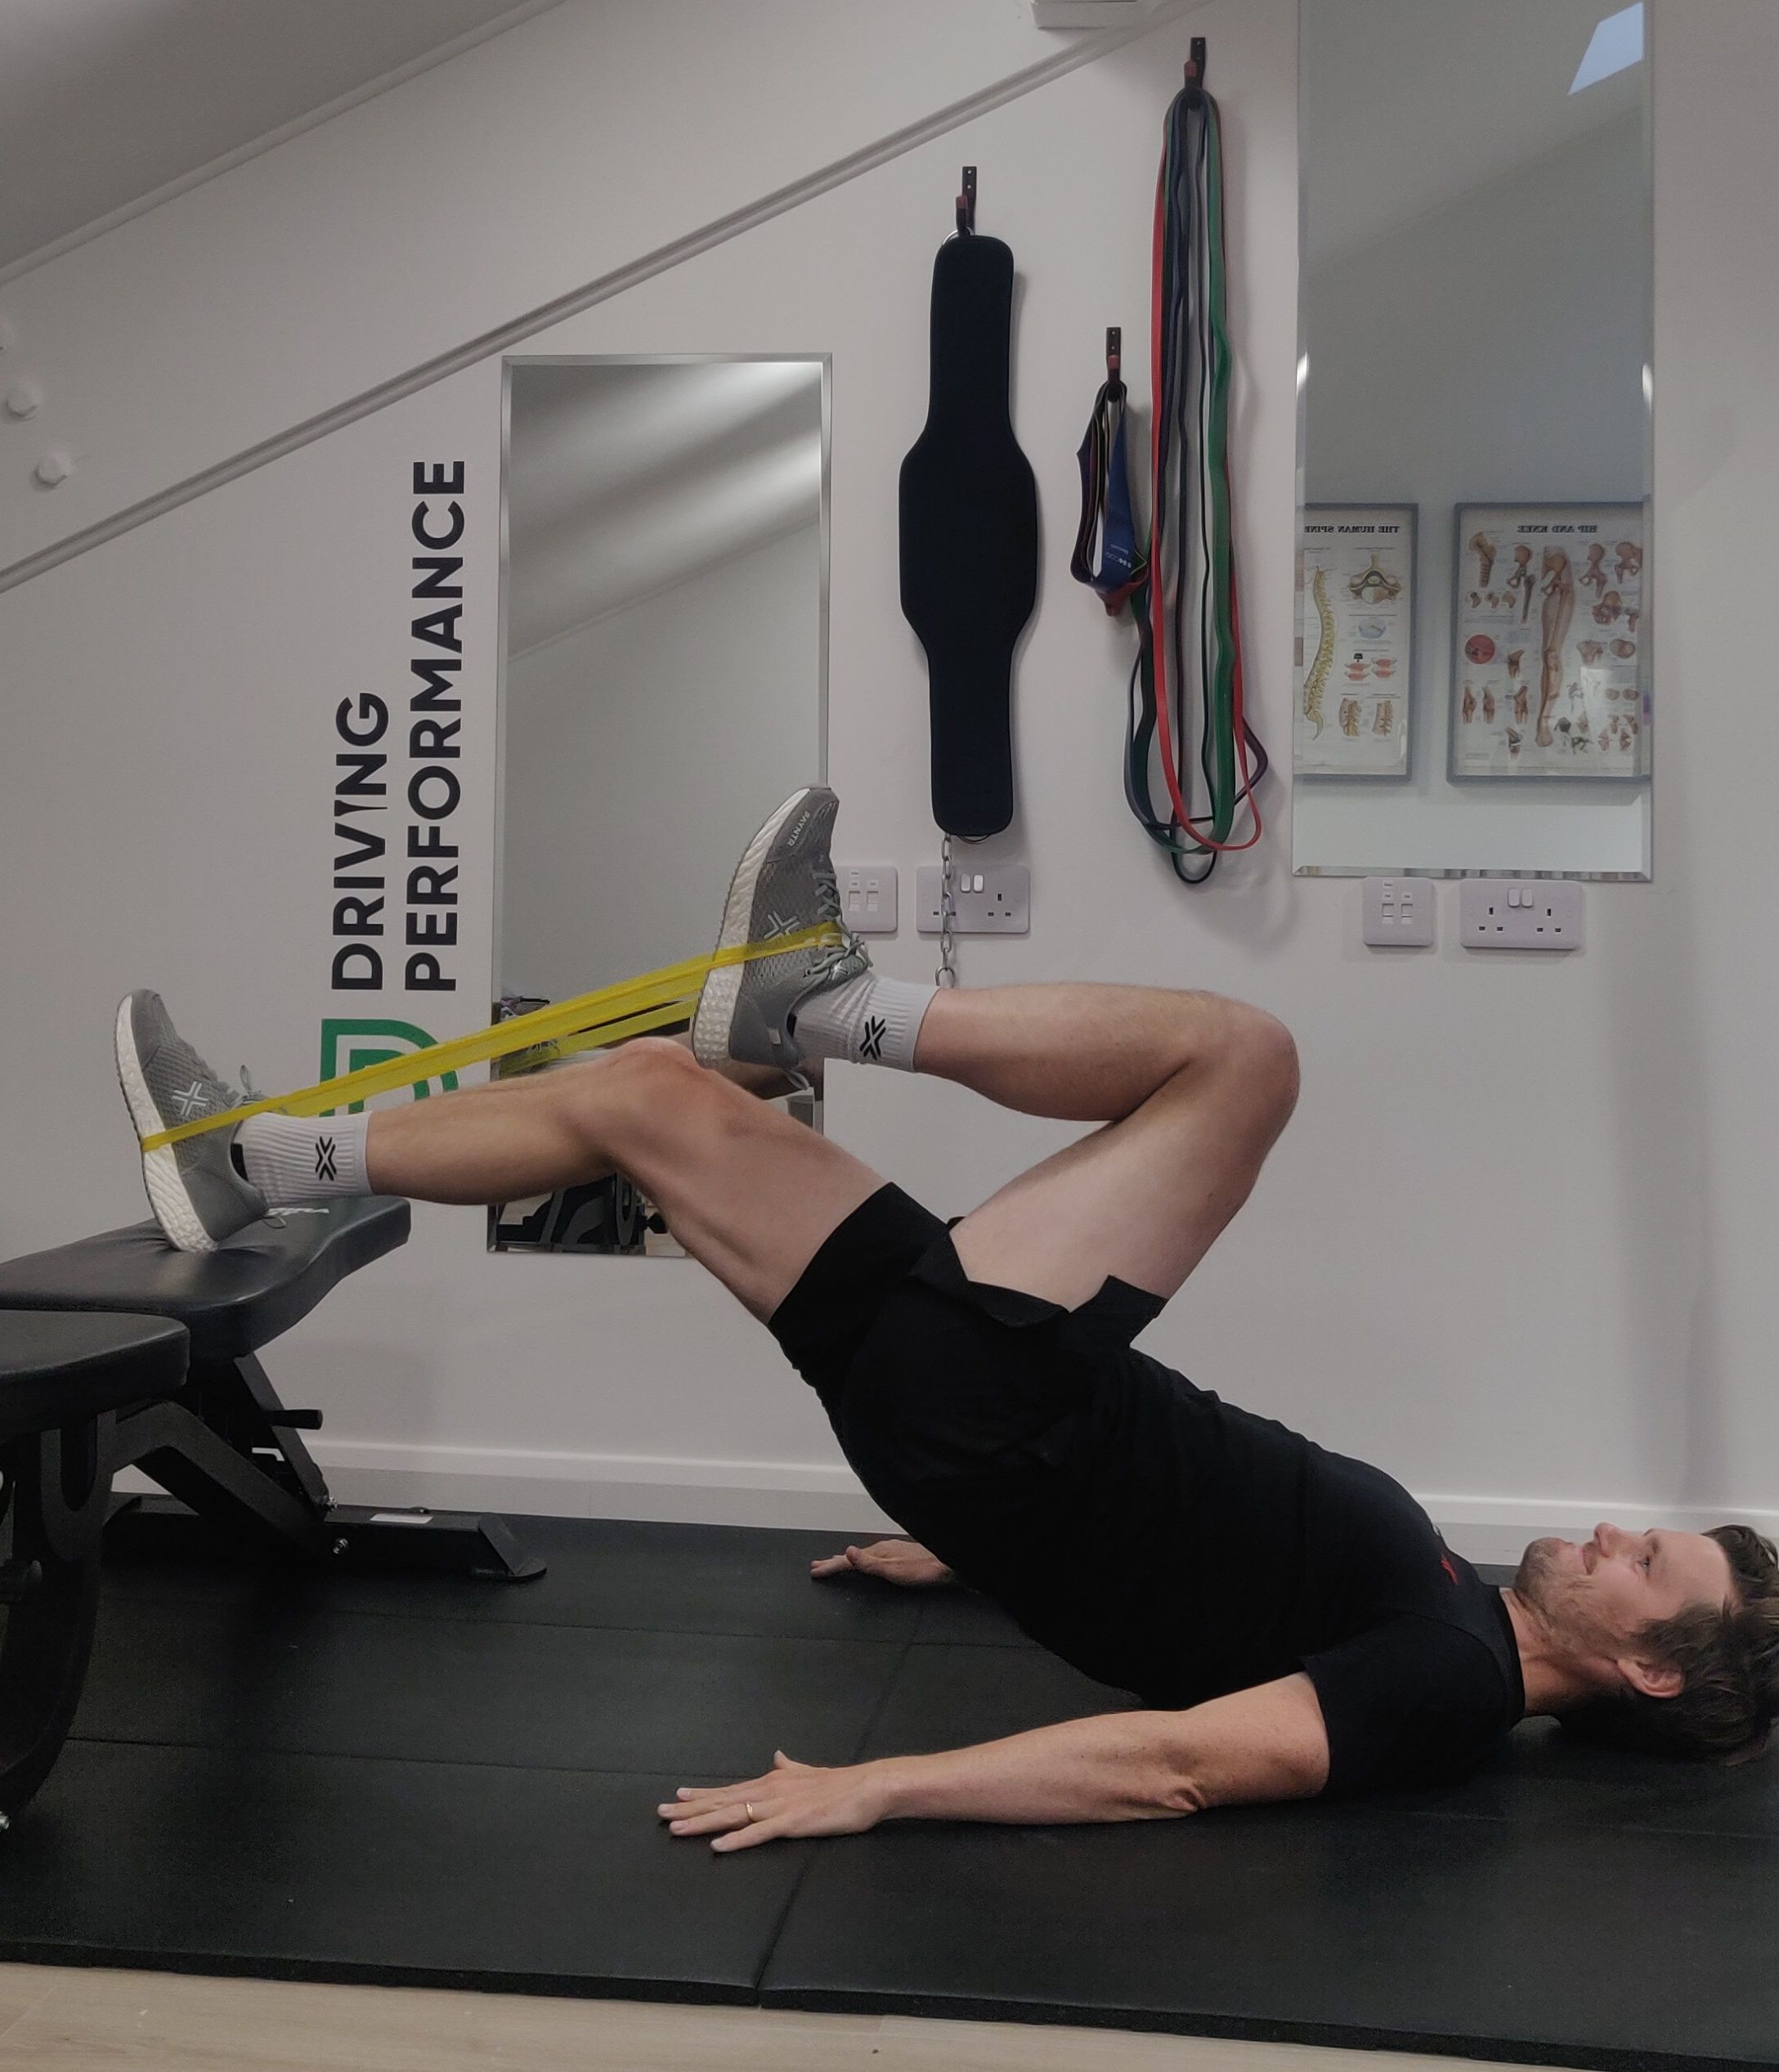 Hip Flexor Exercises To Help With Mobility and Strength